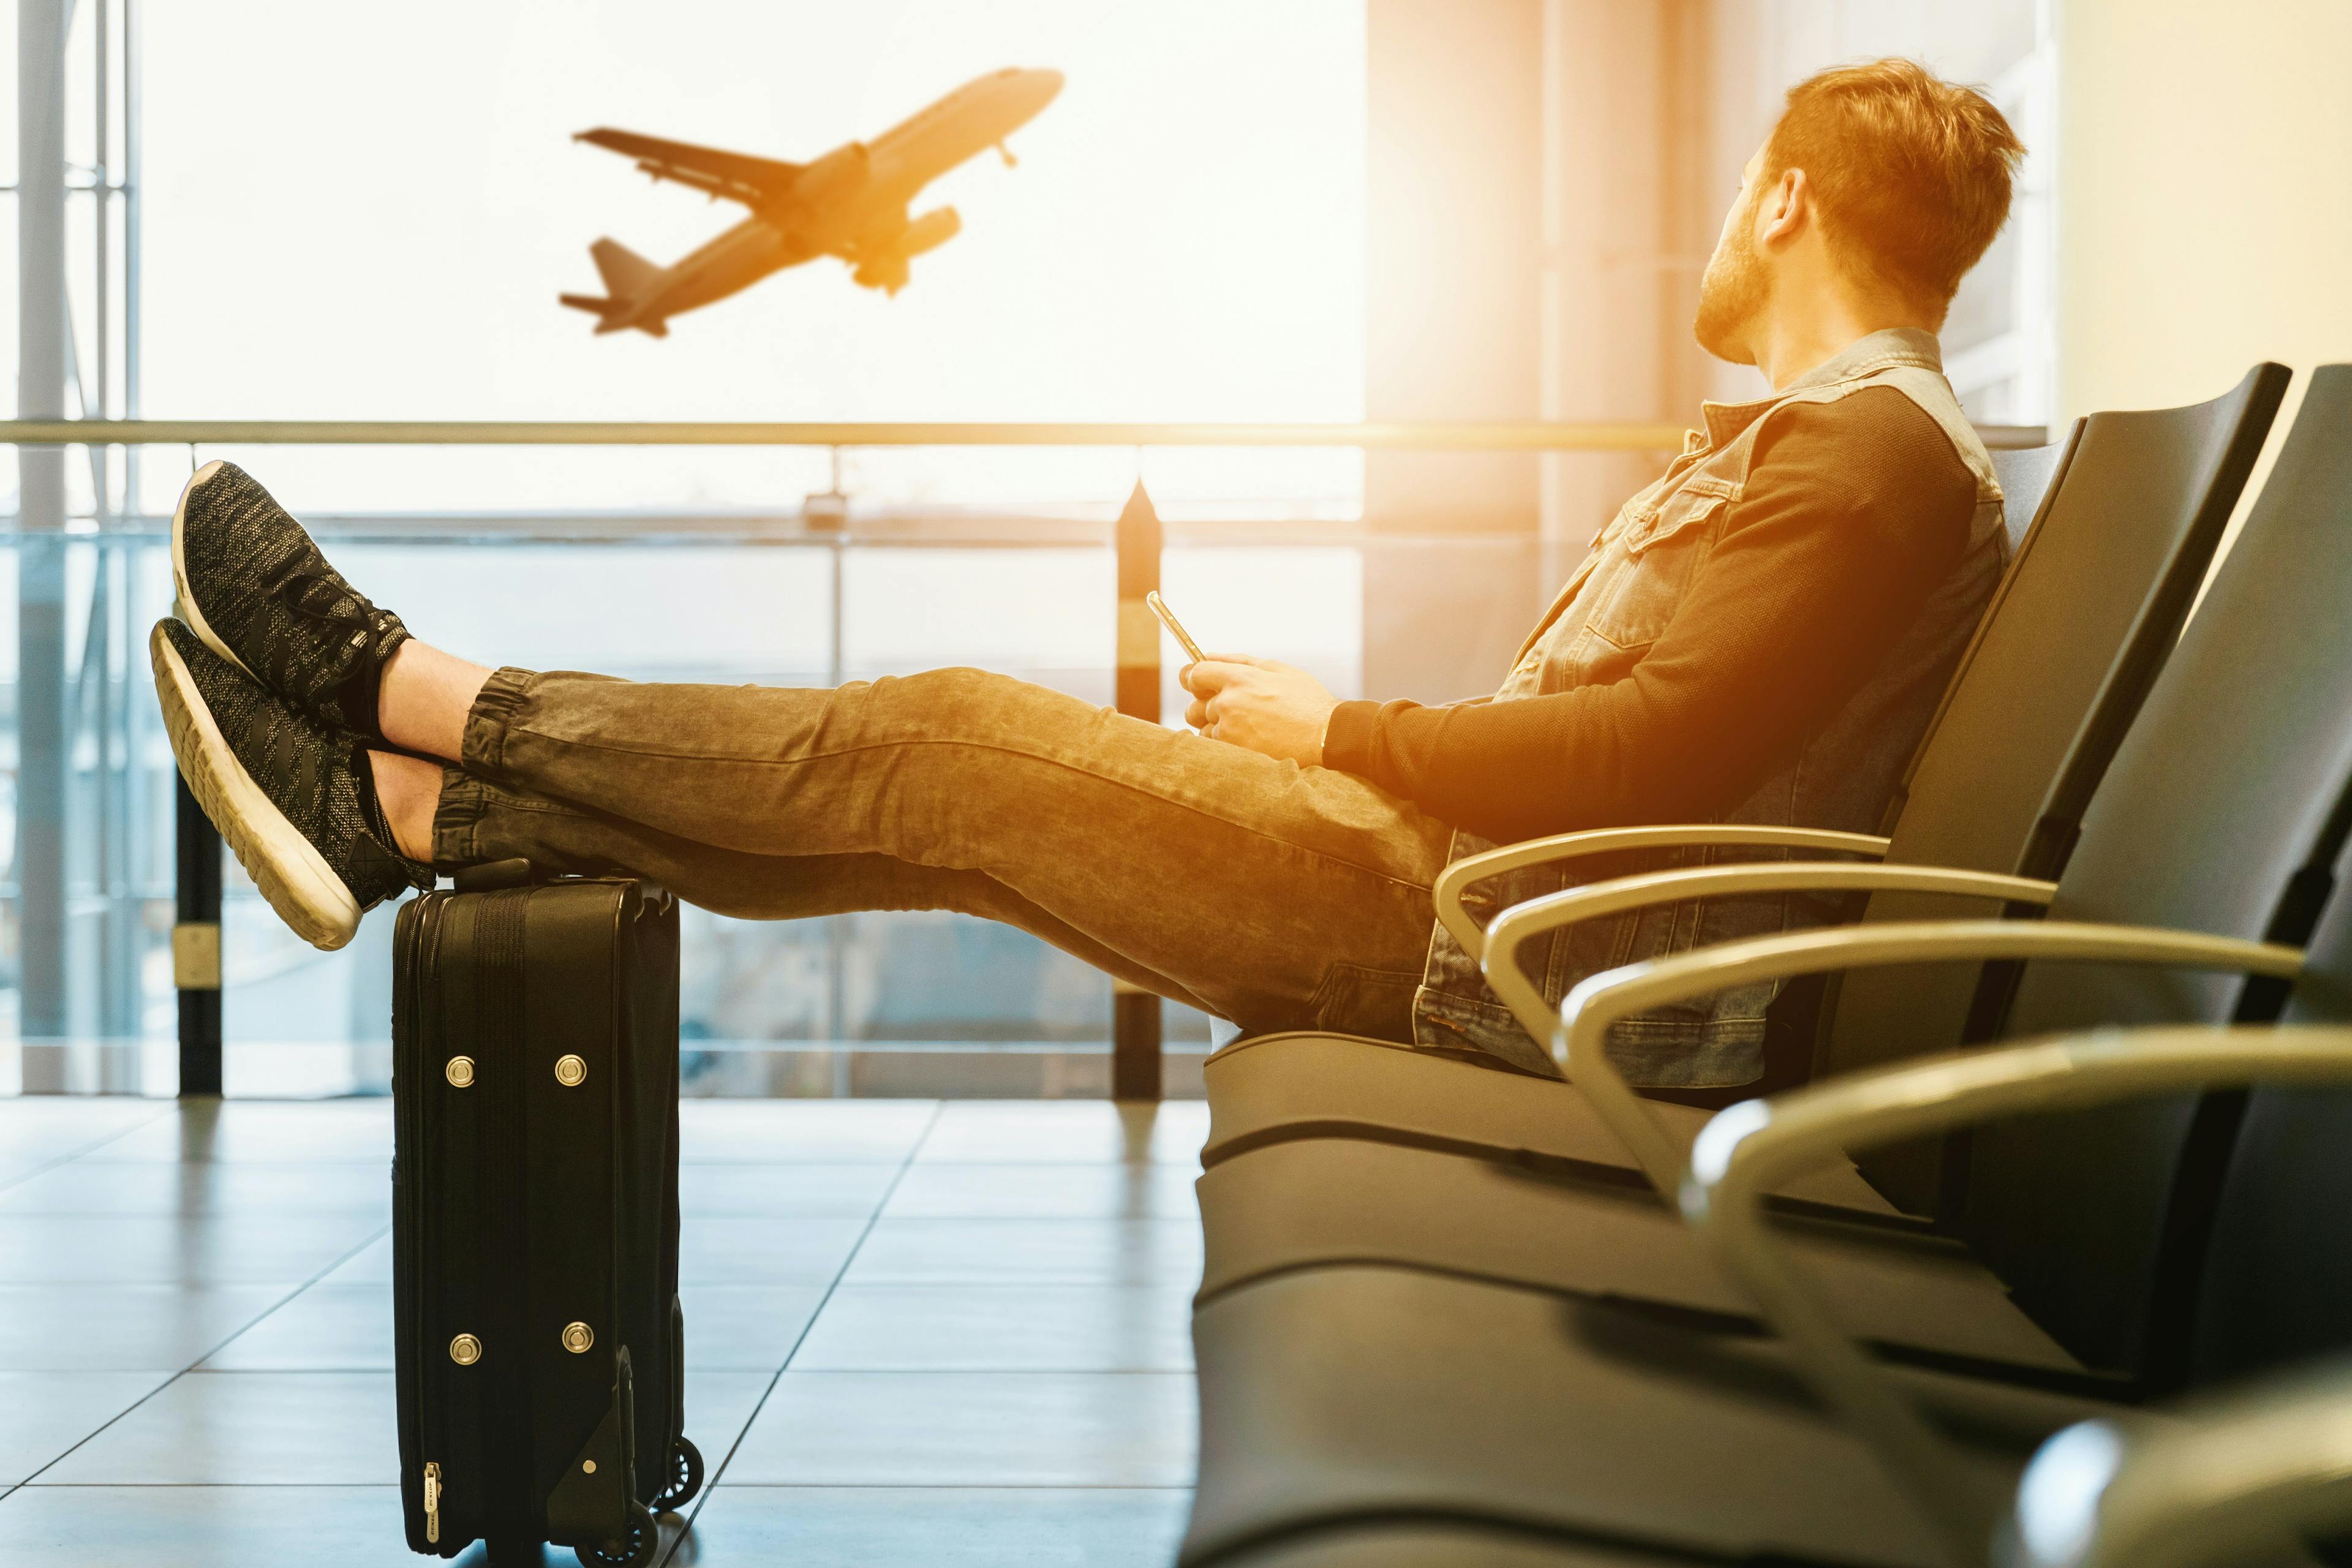 a man is seating in a chair in an airport lounge, resting his legs in his luggage while looking through the window at an airplane that's taking off